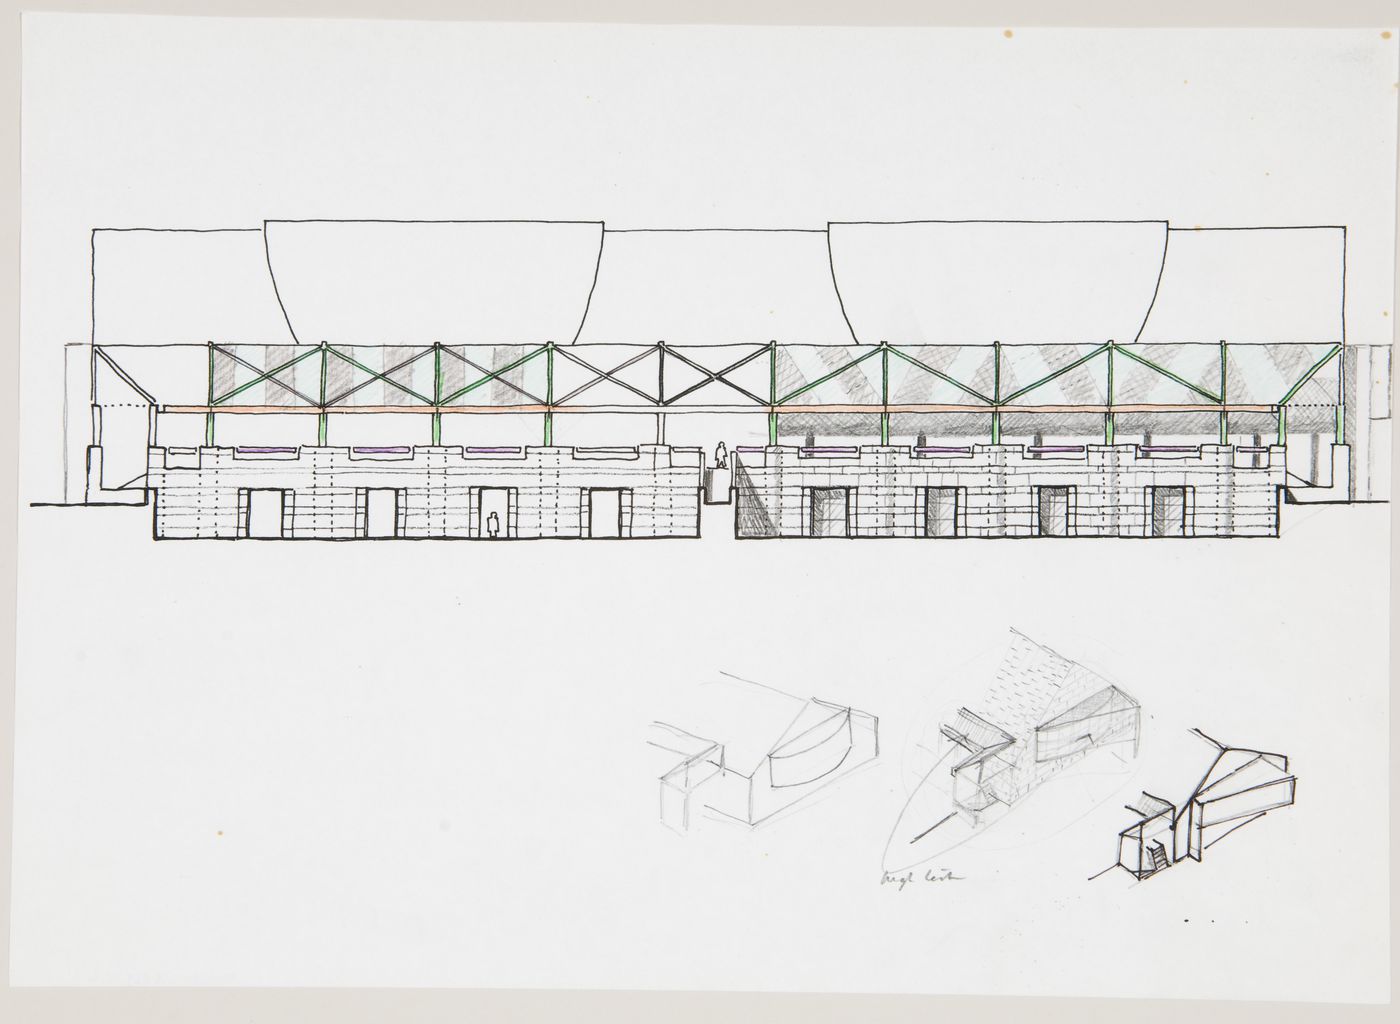 Biblioteca pubblica, Latina, Italy: sectional elevation and sketches